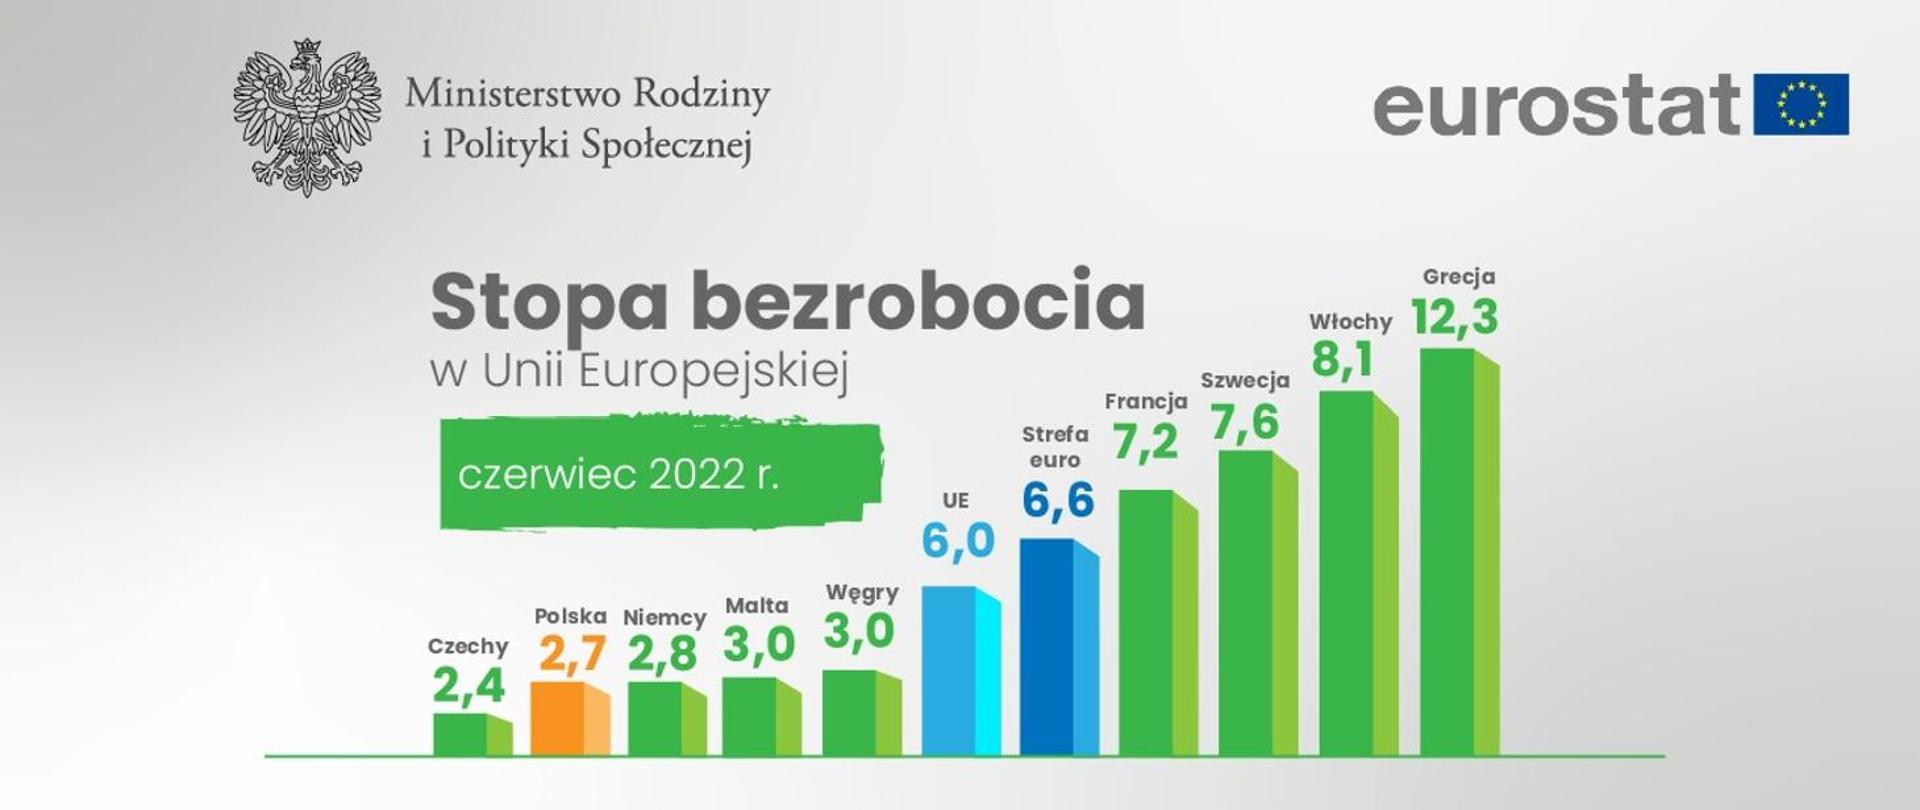 Eurostat. Poland once again at the forefront of the countries with the lowest unemployment rate